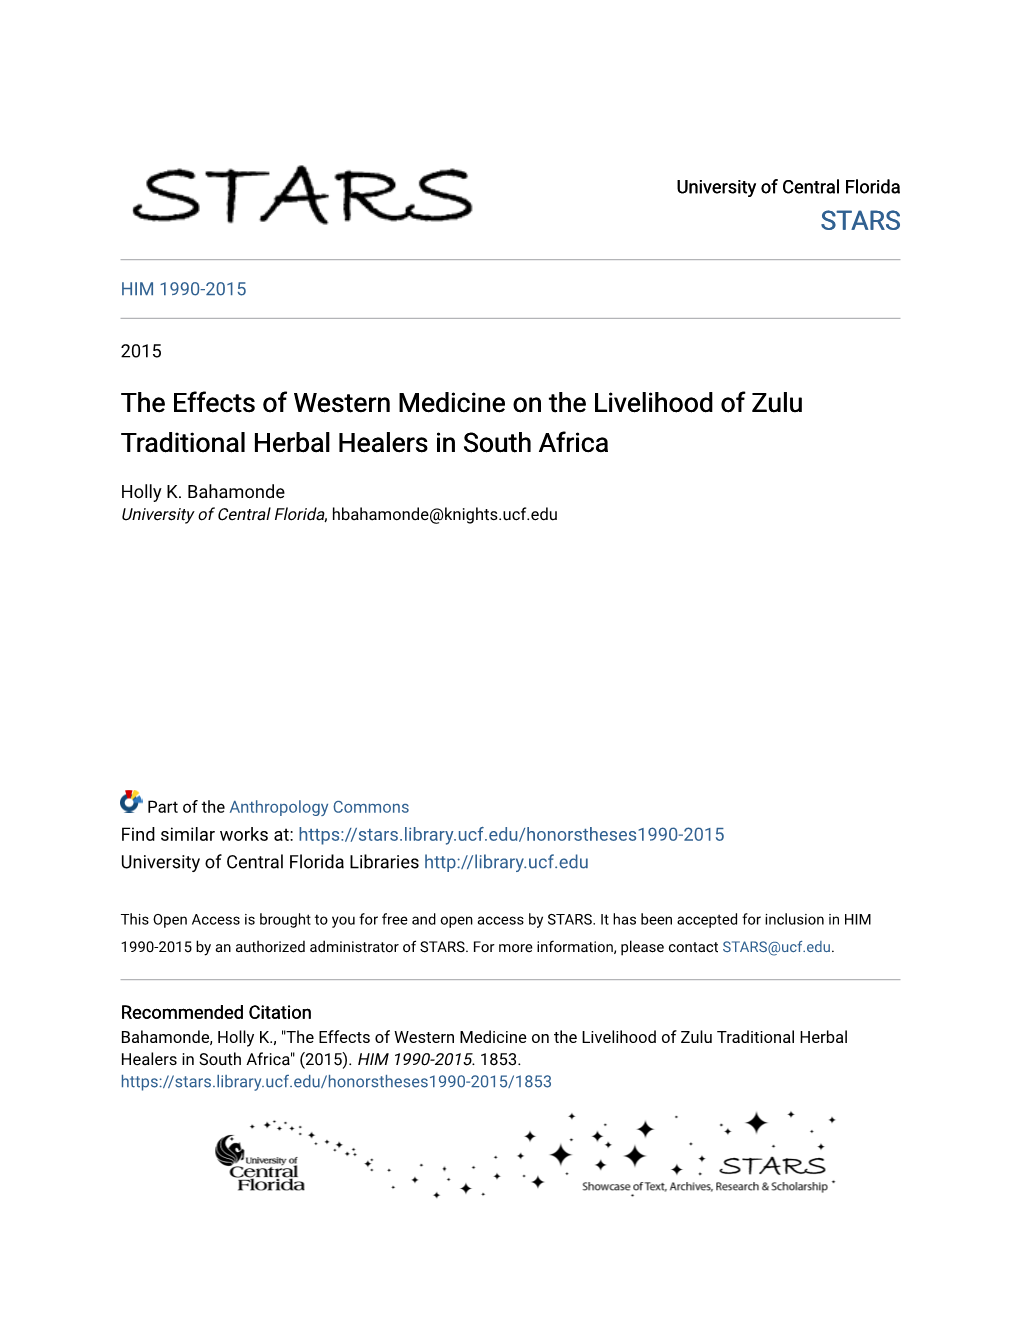 The Effects of Western Medicine on the Livelihood of Zulu Traditional Herbal Healers in South Africa